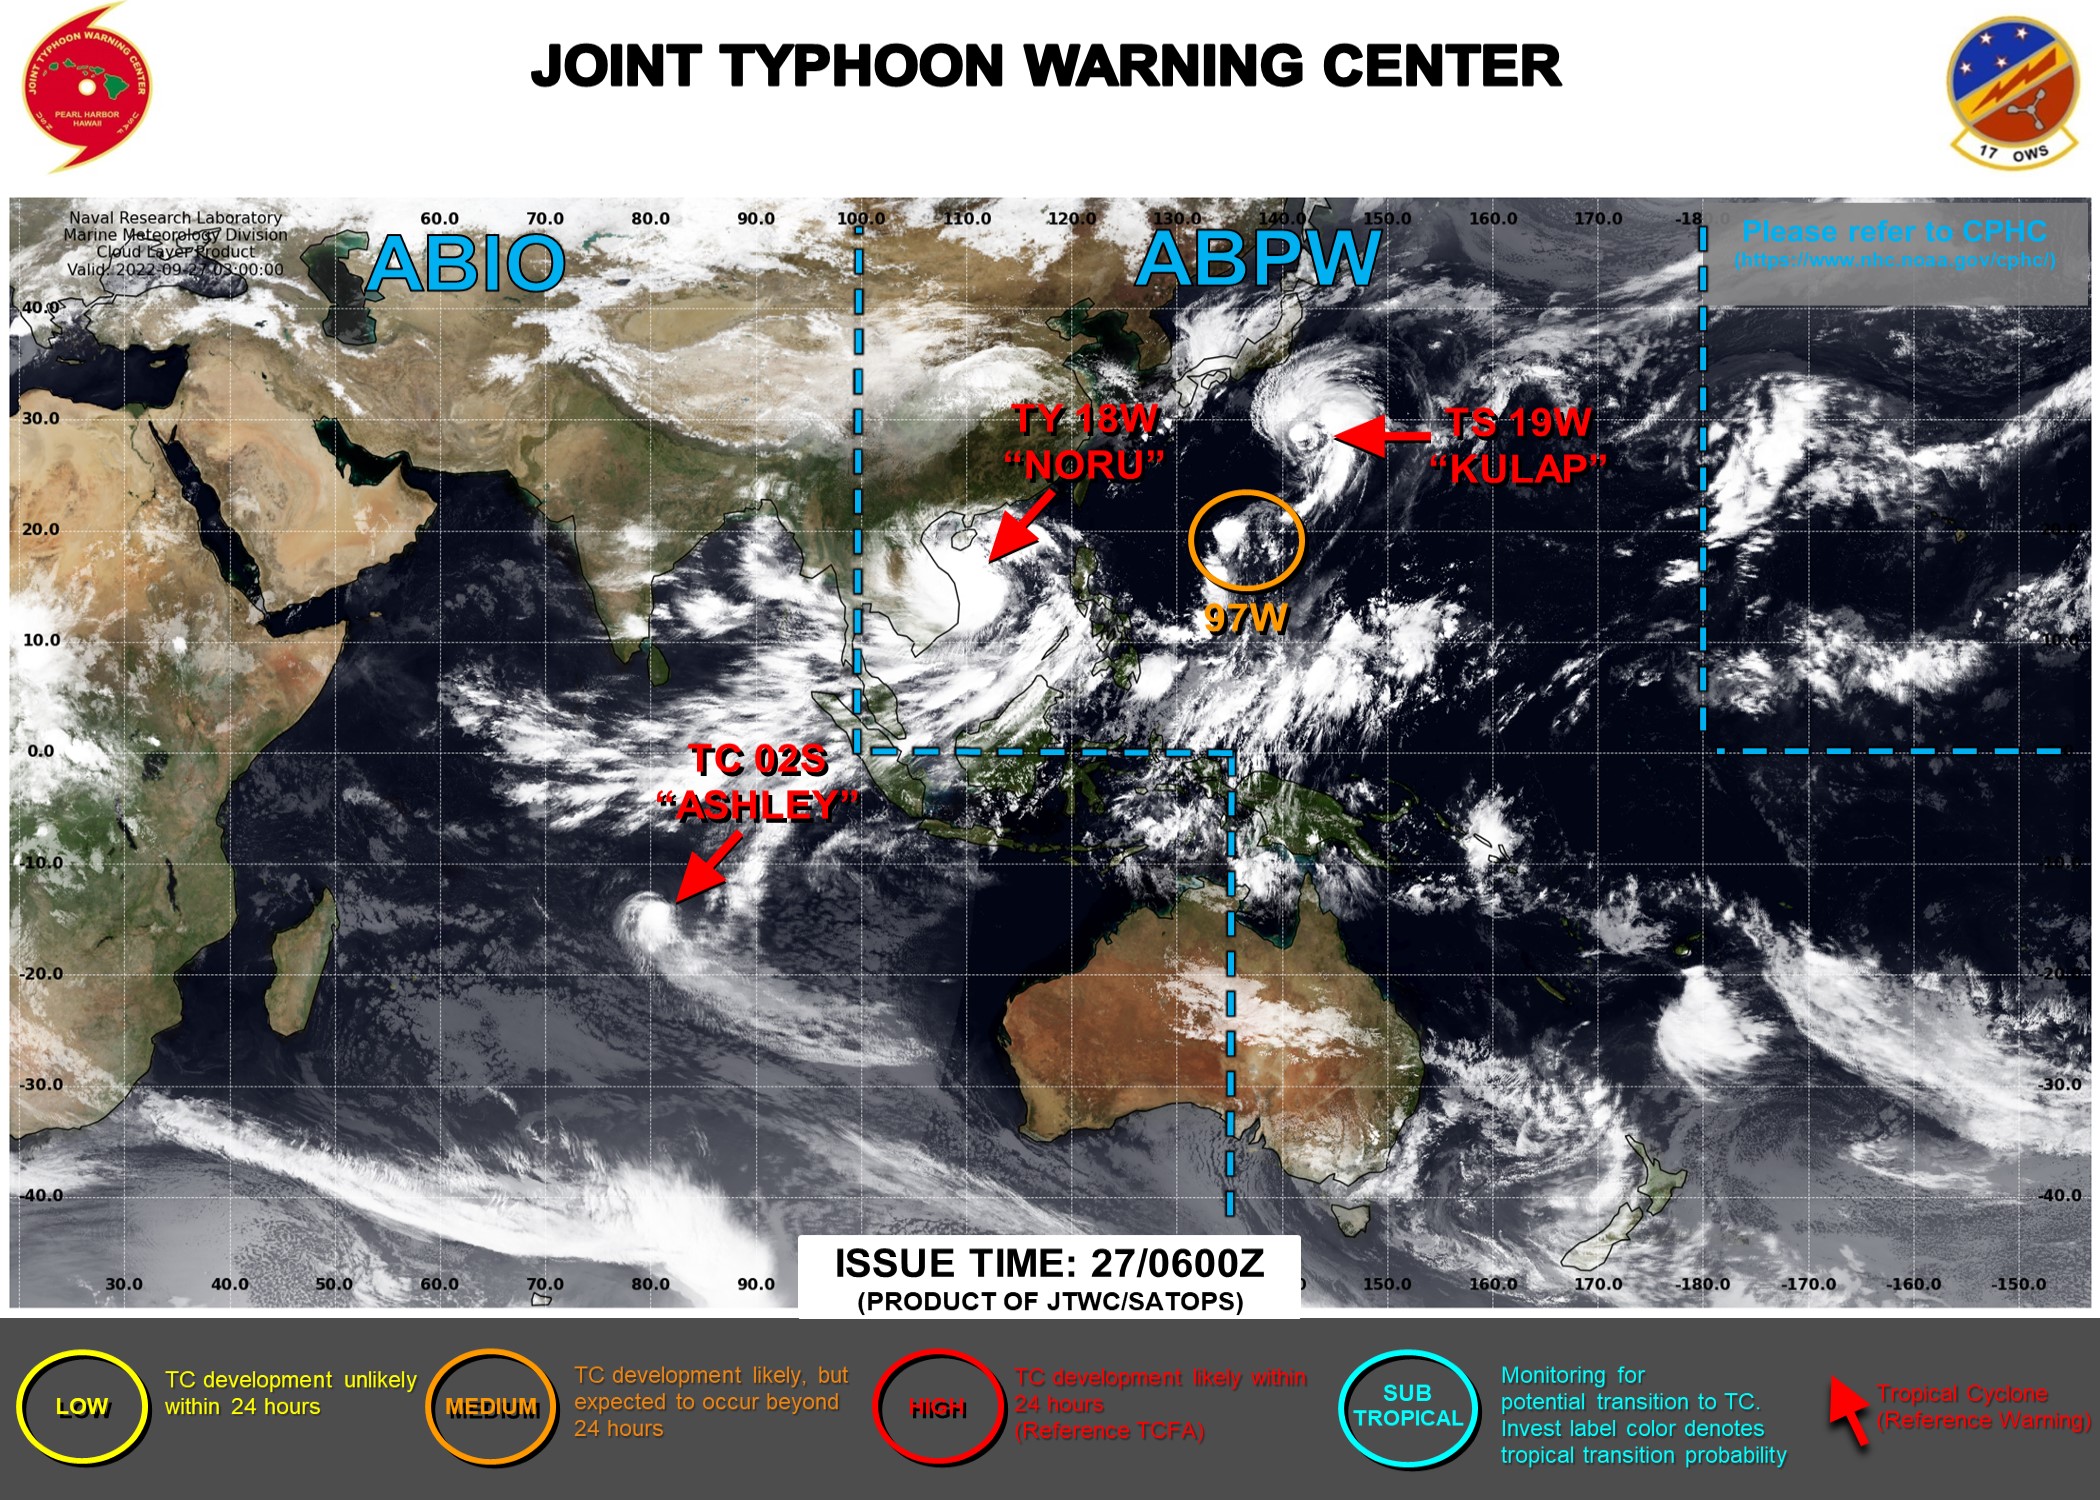 JTWC IS ISSUING 6HOURLY WARNINGS AND 3HOURLY SATELLITE BULLETINS ON 18W(NORU) AND 19W(KULAP). 12HOURLY WARNINGS AND 3HOURLY SATELLITE BULLETINS ARE ISSUED ON 02S(ASHLEY).